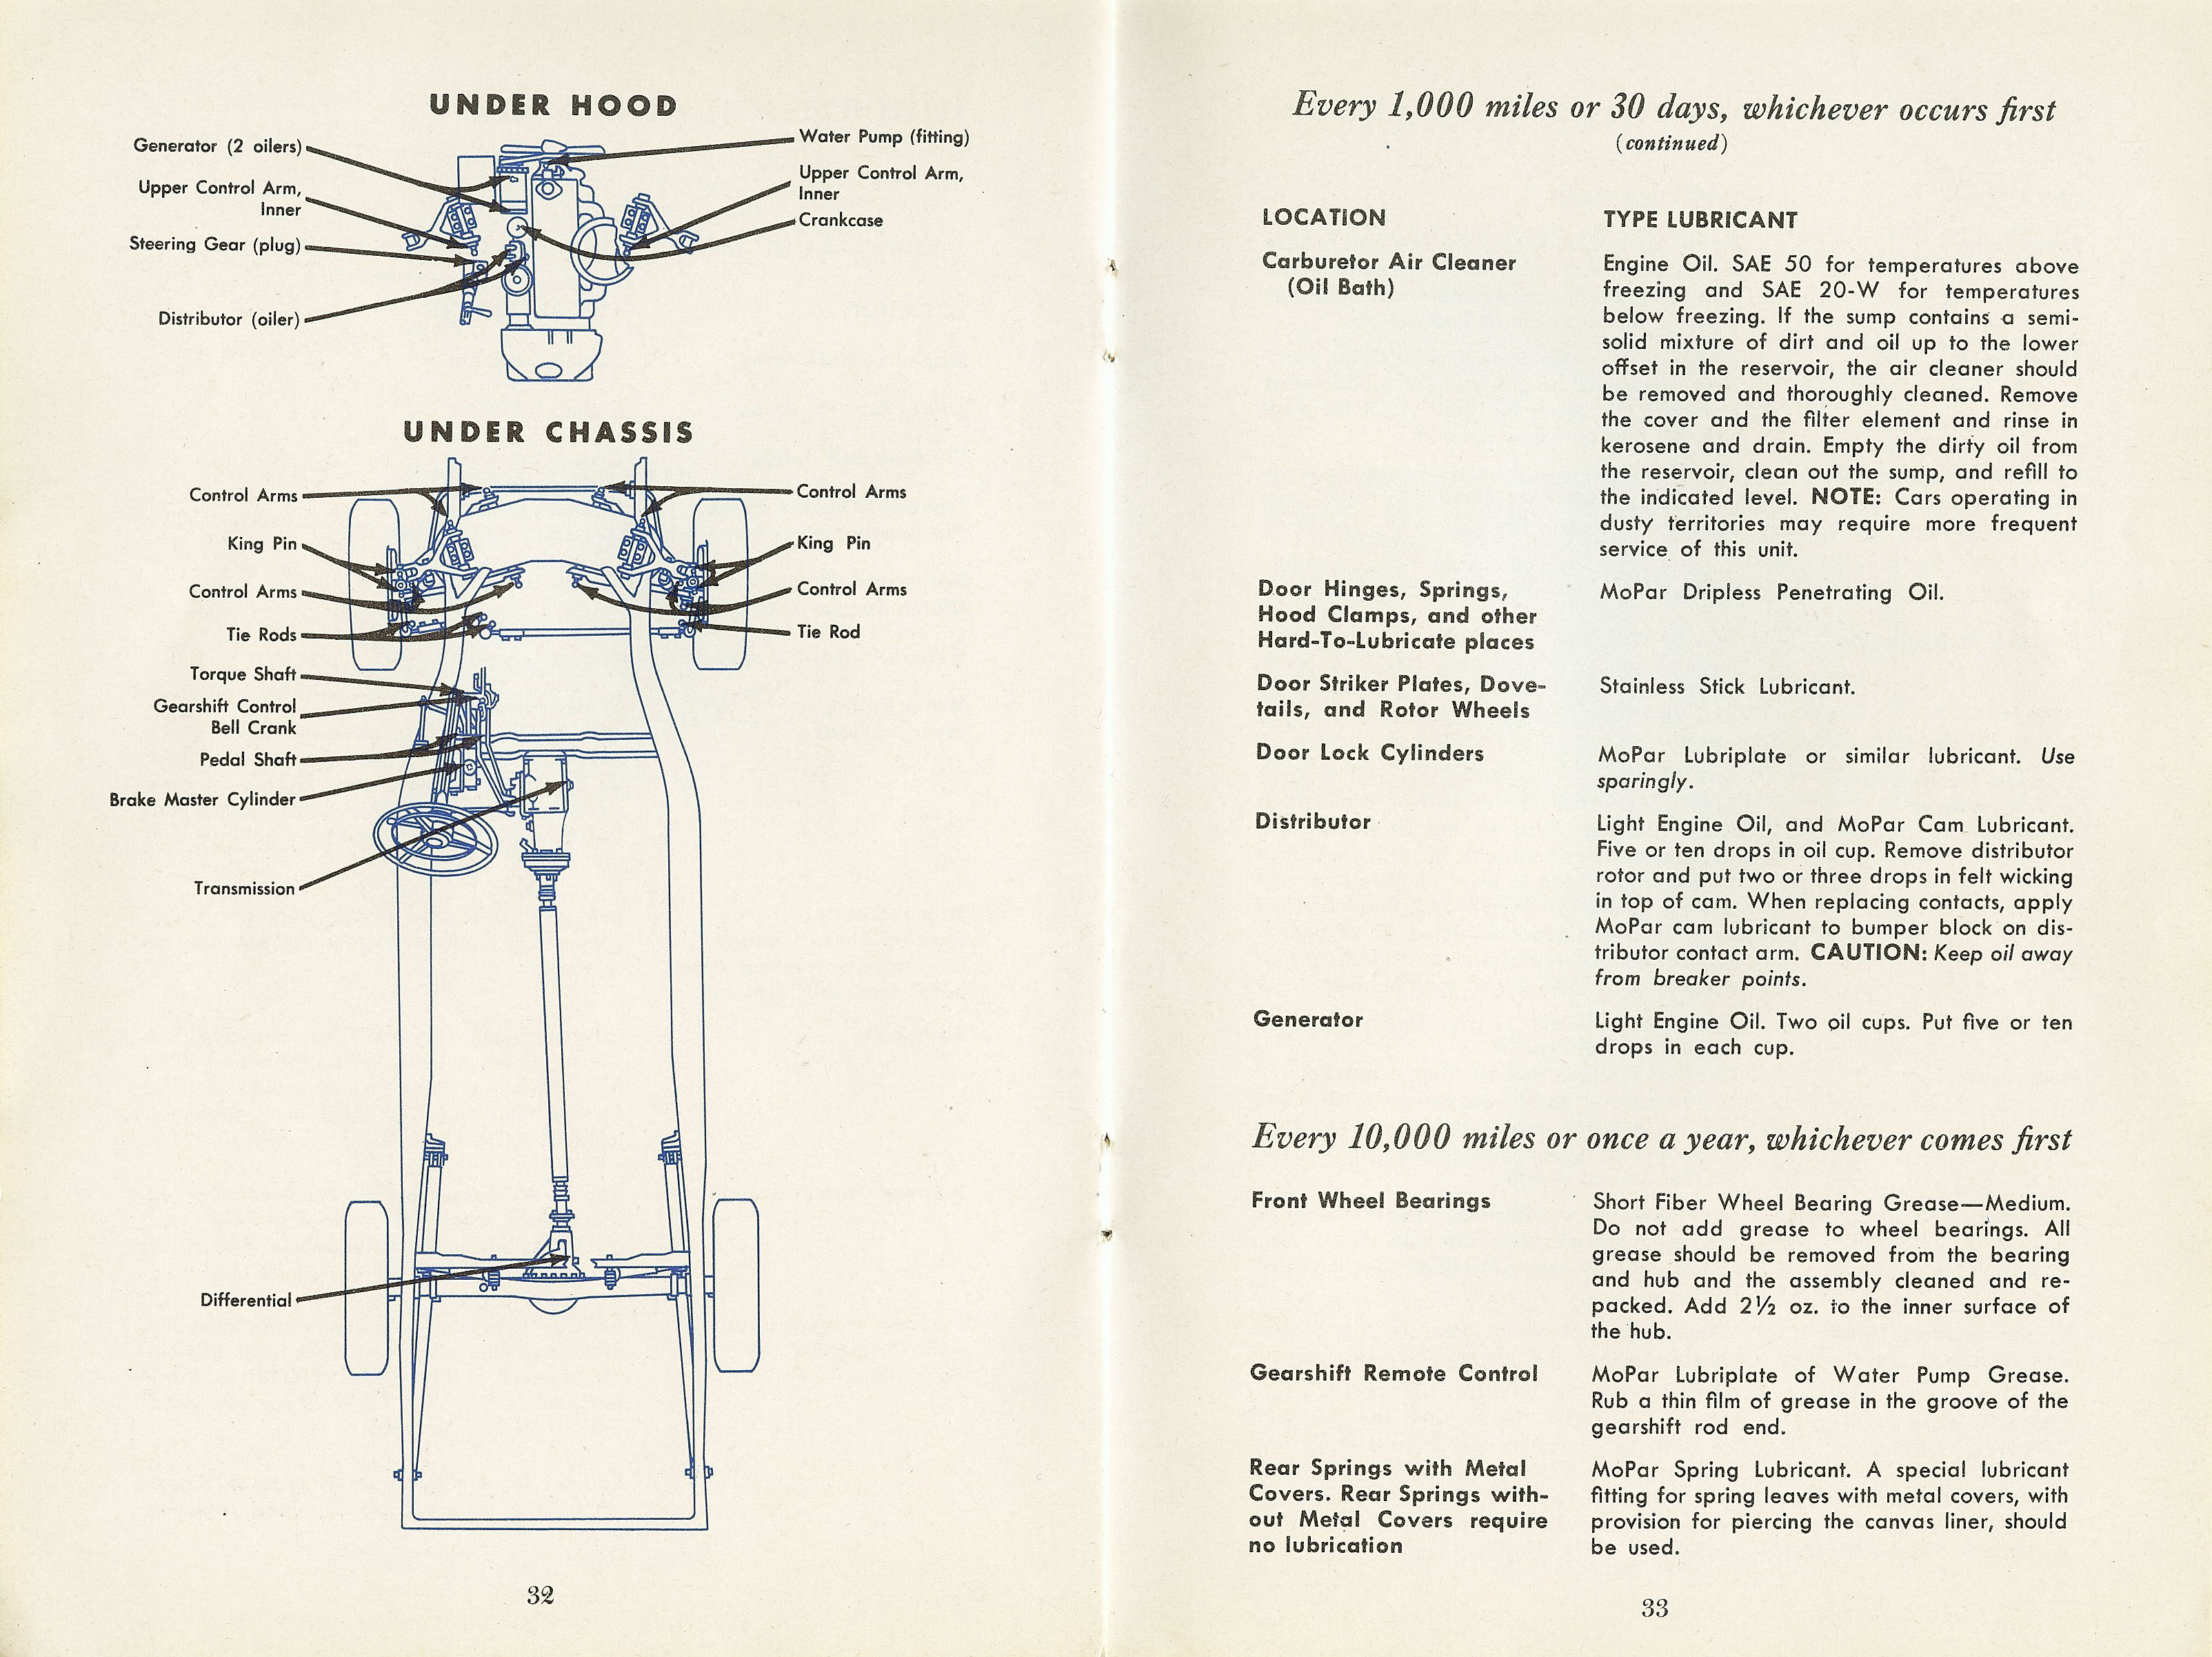 1954_Dodge_Owners_Manual-32-33